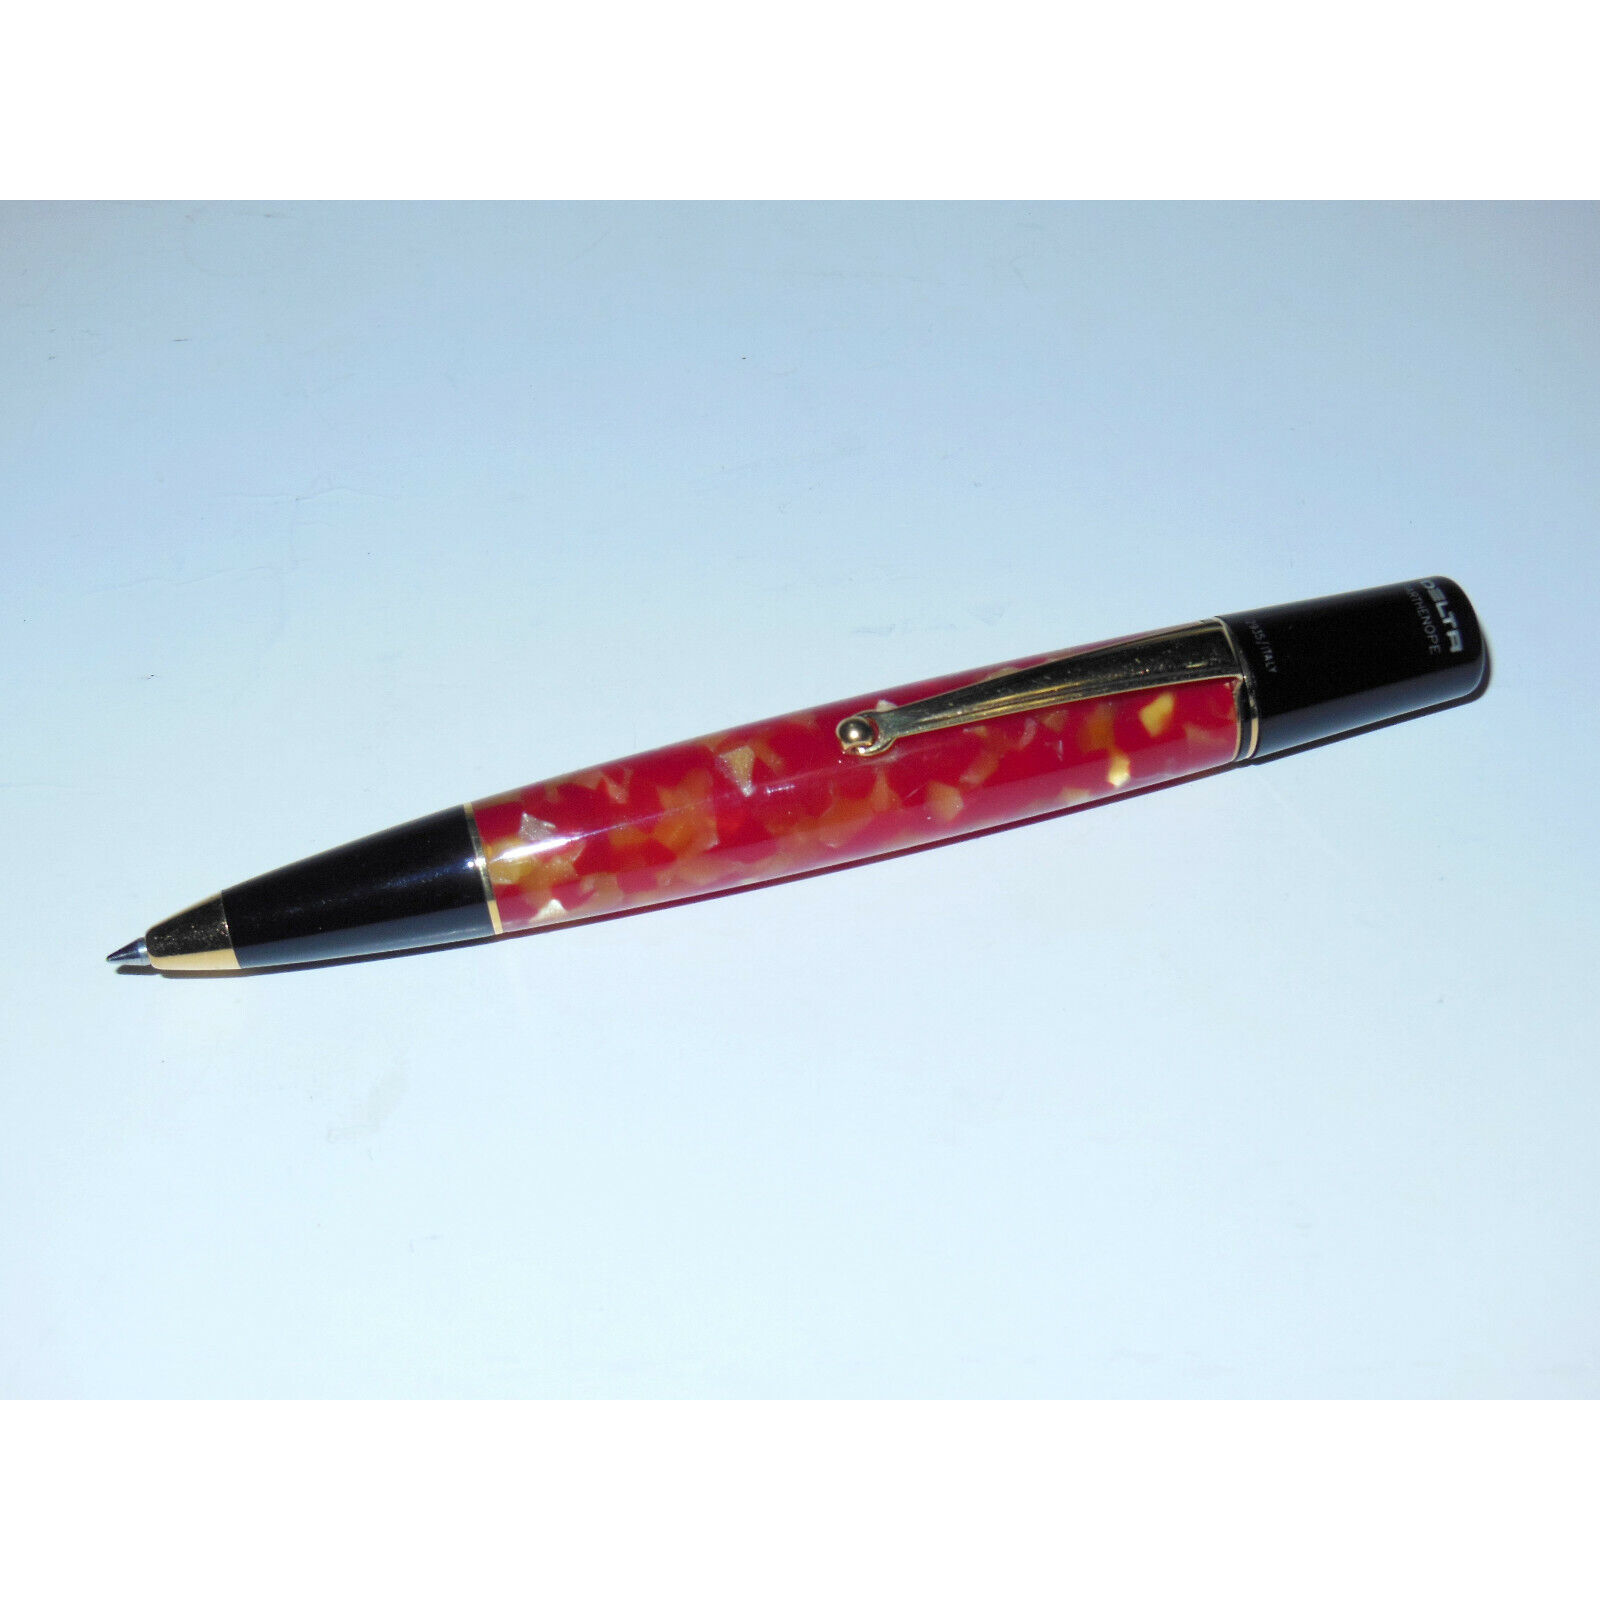 Used* Delta Parthenope Ballpoint Pen Coral Red/Black/Gold Trim DO84007 Italy